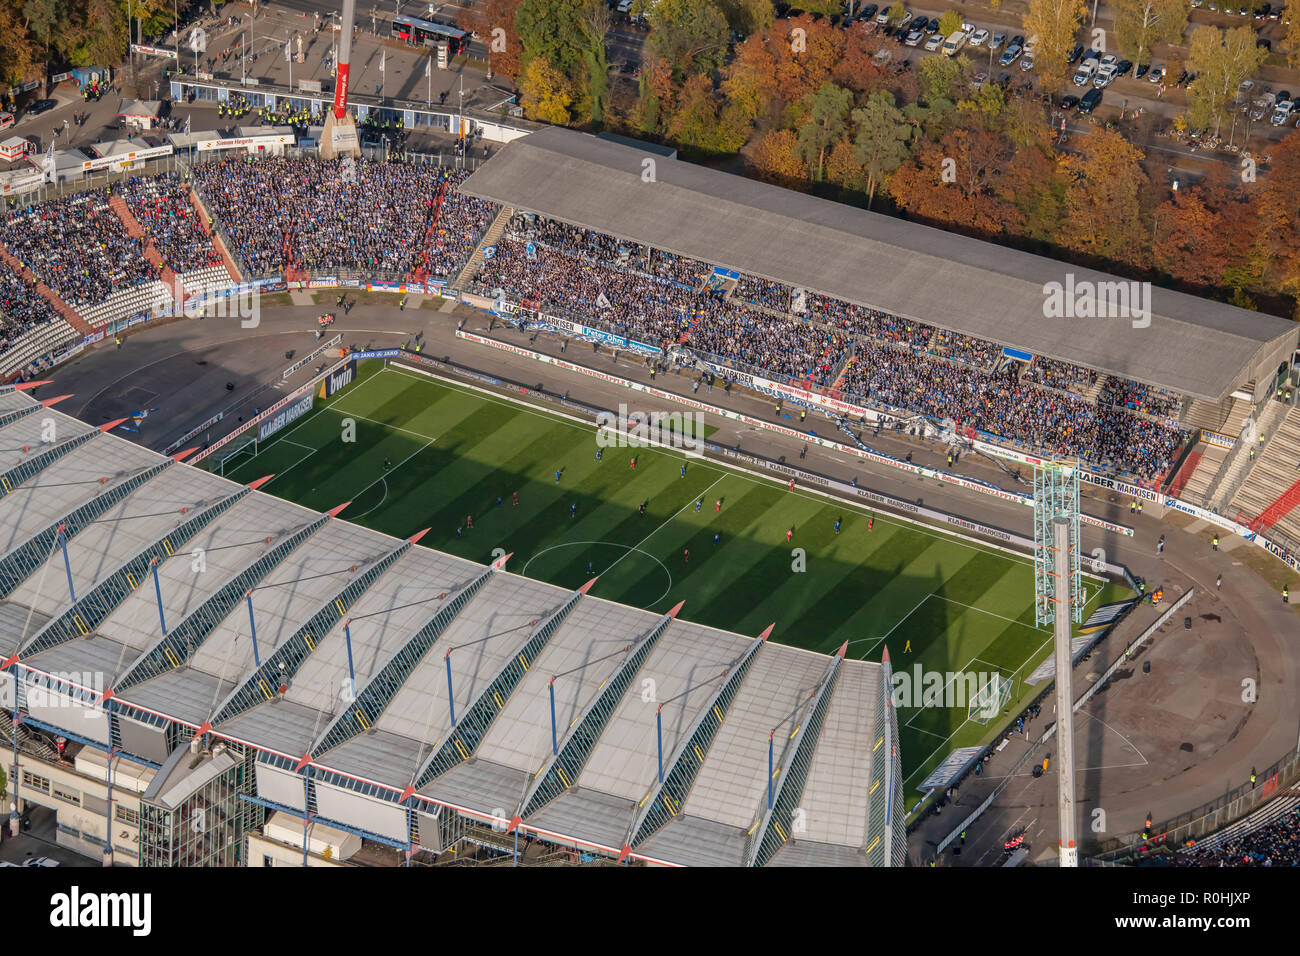 Karlsruhe, Deutschland. 22nd Sep, 2018. Today is the last game in the old Wildparkstadion. The new construction of the stadium starts on 05.11.2018. GES/football/aerial photos Last game at KSC Wildparkstadion, KSC - Wuerzbueger Kickers, 03.11.2018 Football/Soccer: 3rd League: Aerial view of Karlsruhe Stadium/Wildpark Stadium, Karlsruhe, November 03, 2018 | usage worldwide Credit: dpa/Alamy Live News Stock Photo